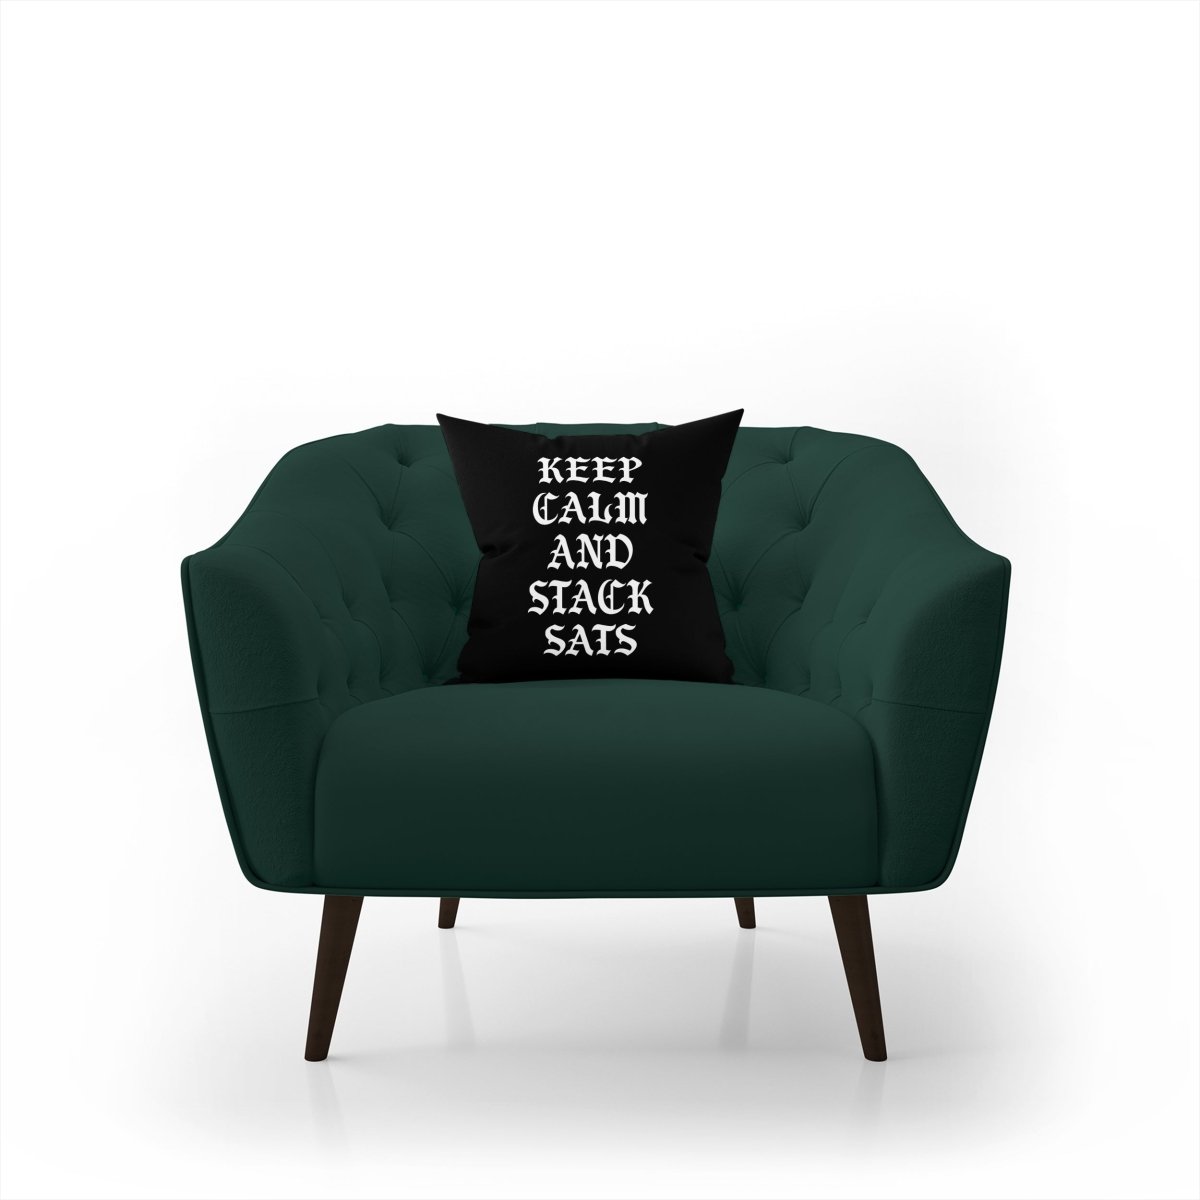 Cryptocurrency Gift Ideas - Keep Calm And Stack Sats Pillow (Gothic) displayed on green armchair.